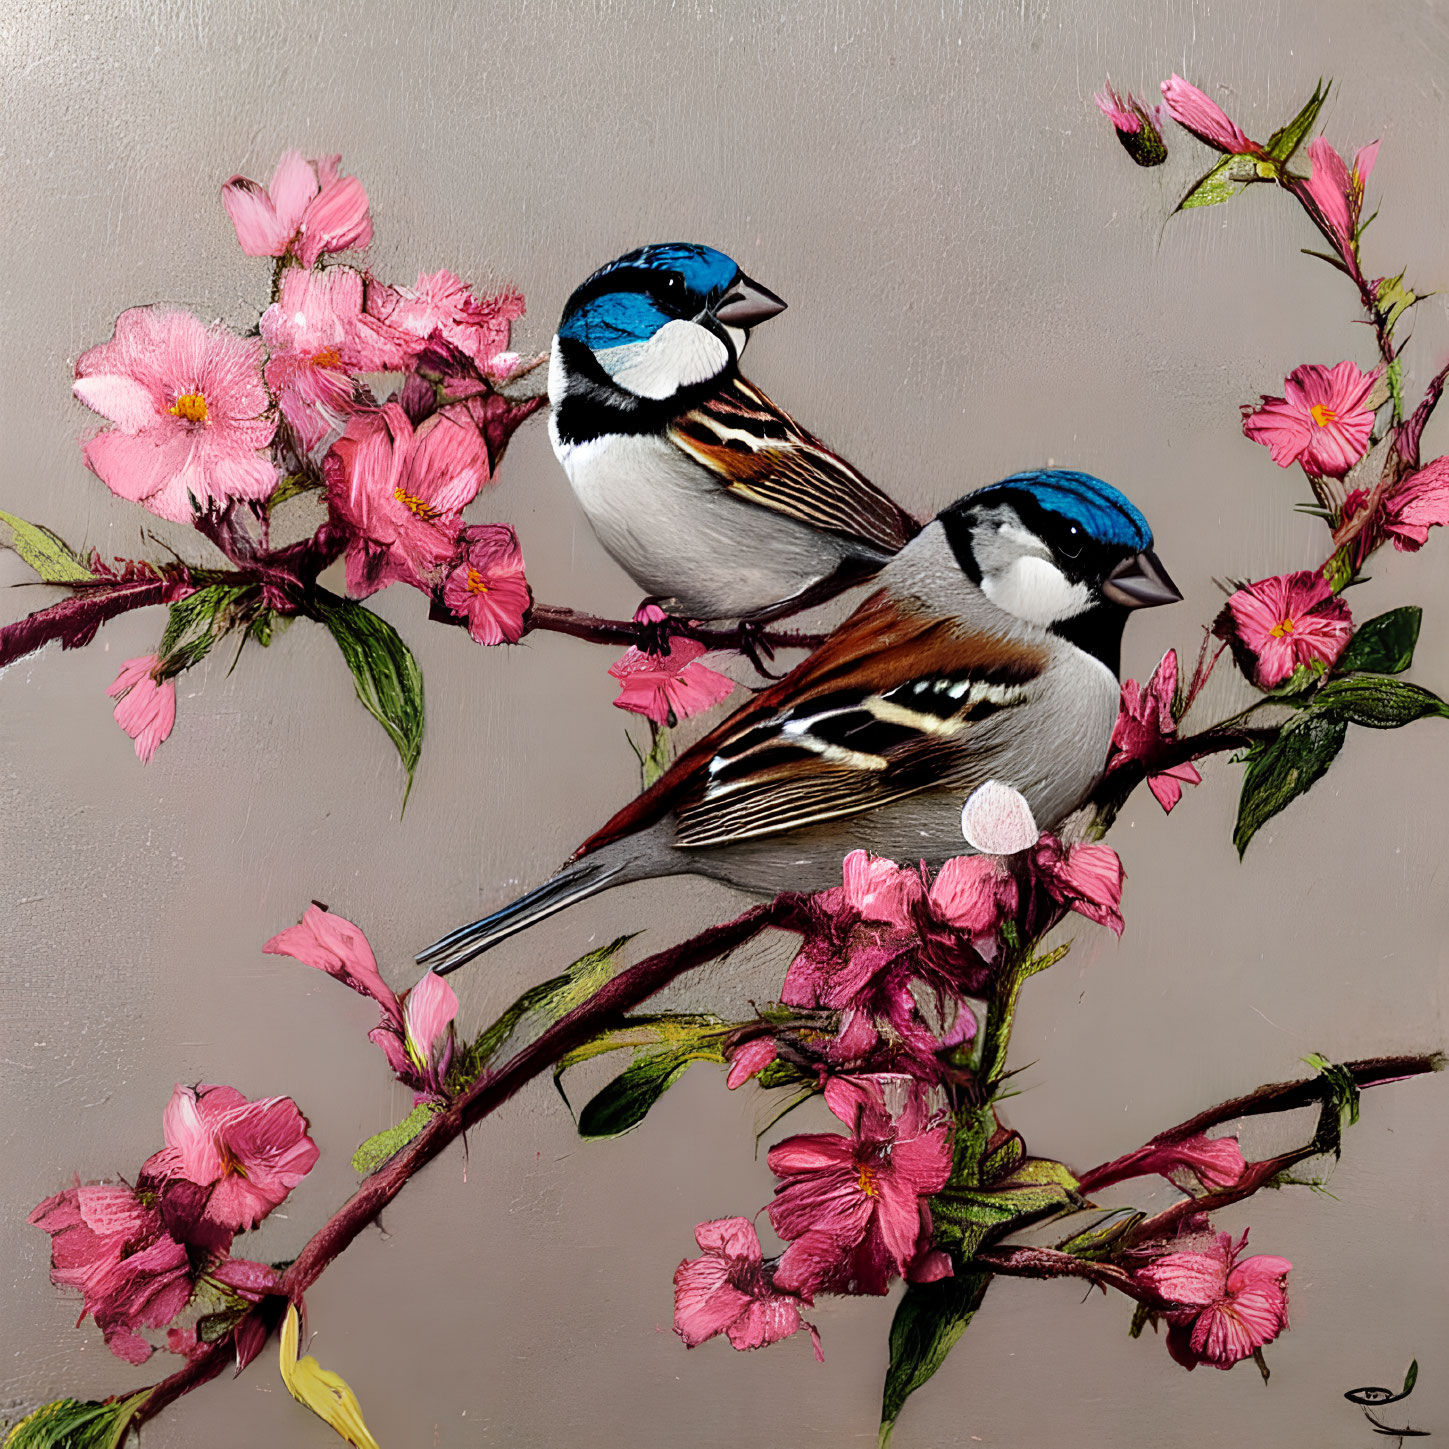 Vibrant blue-capped birds with white cheeks on pink blossom branches